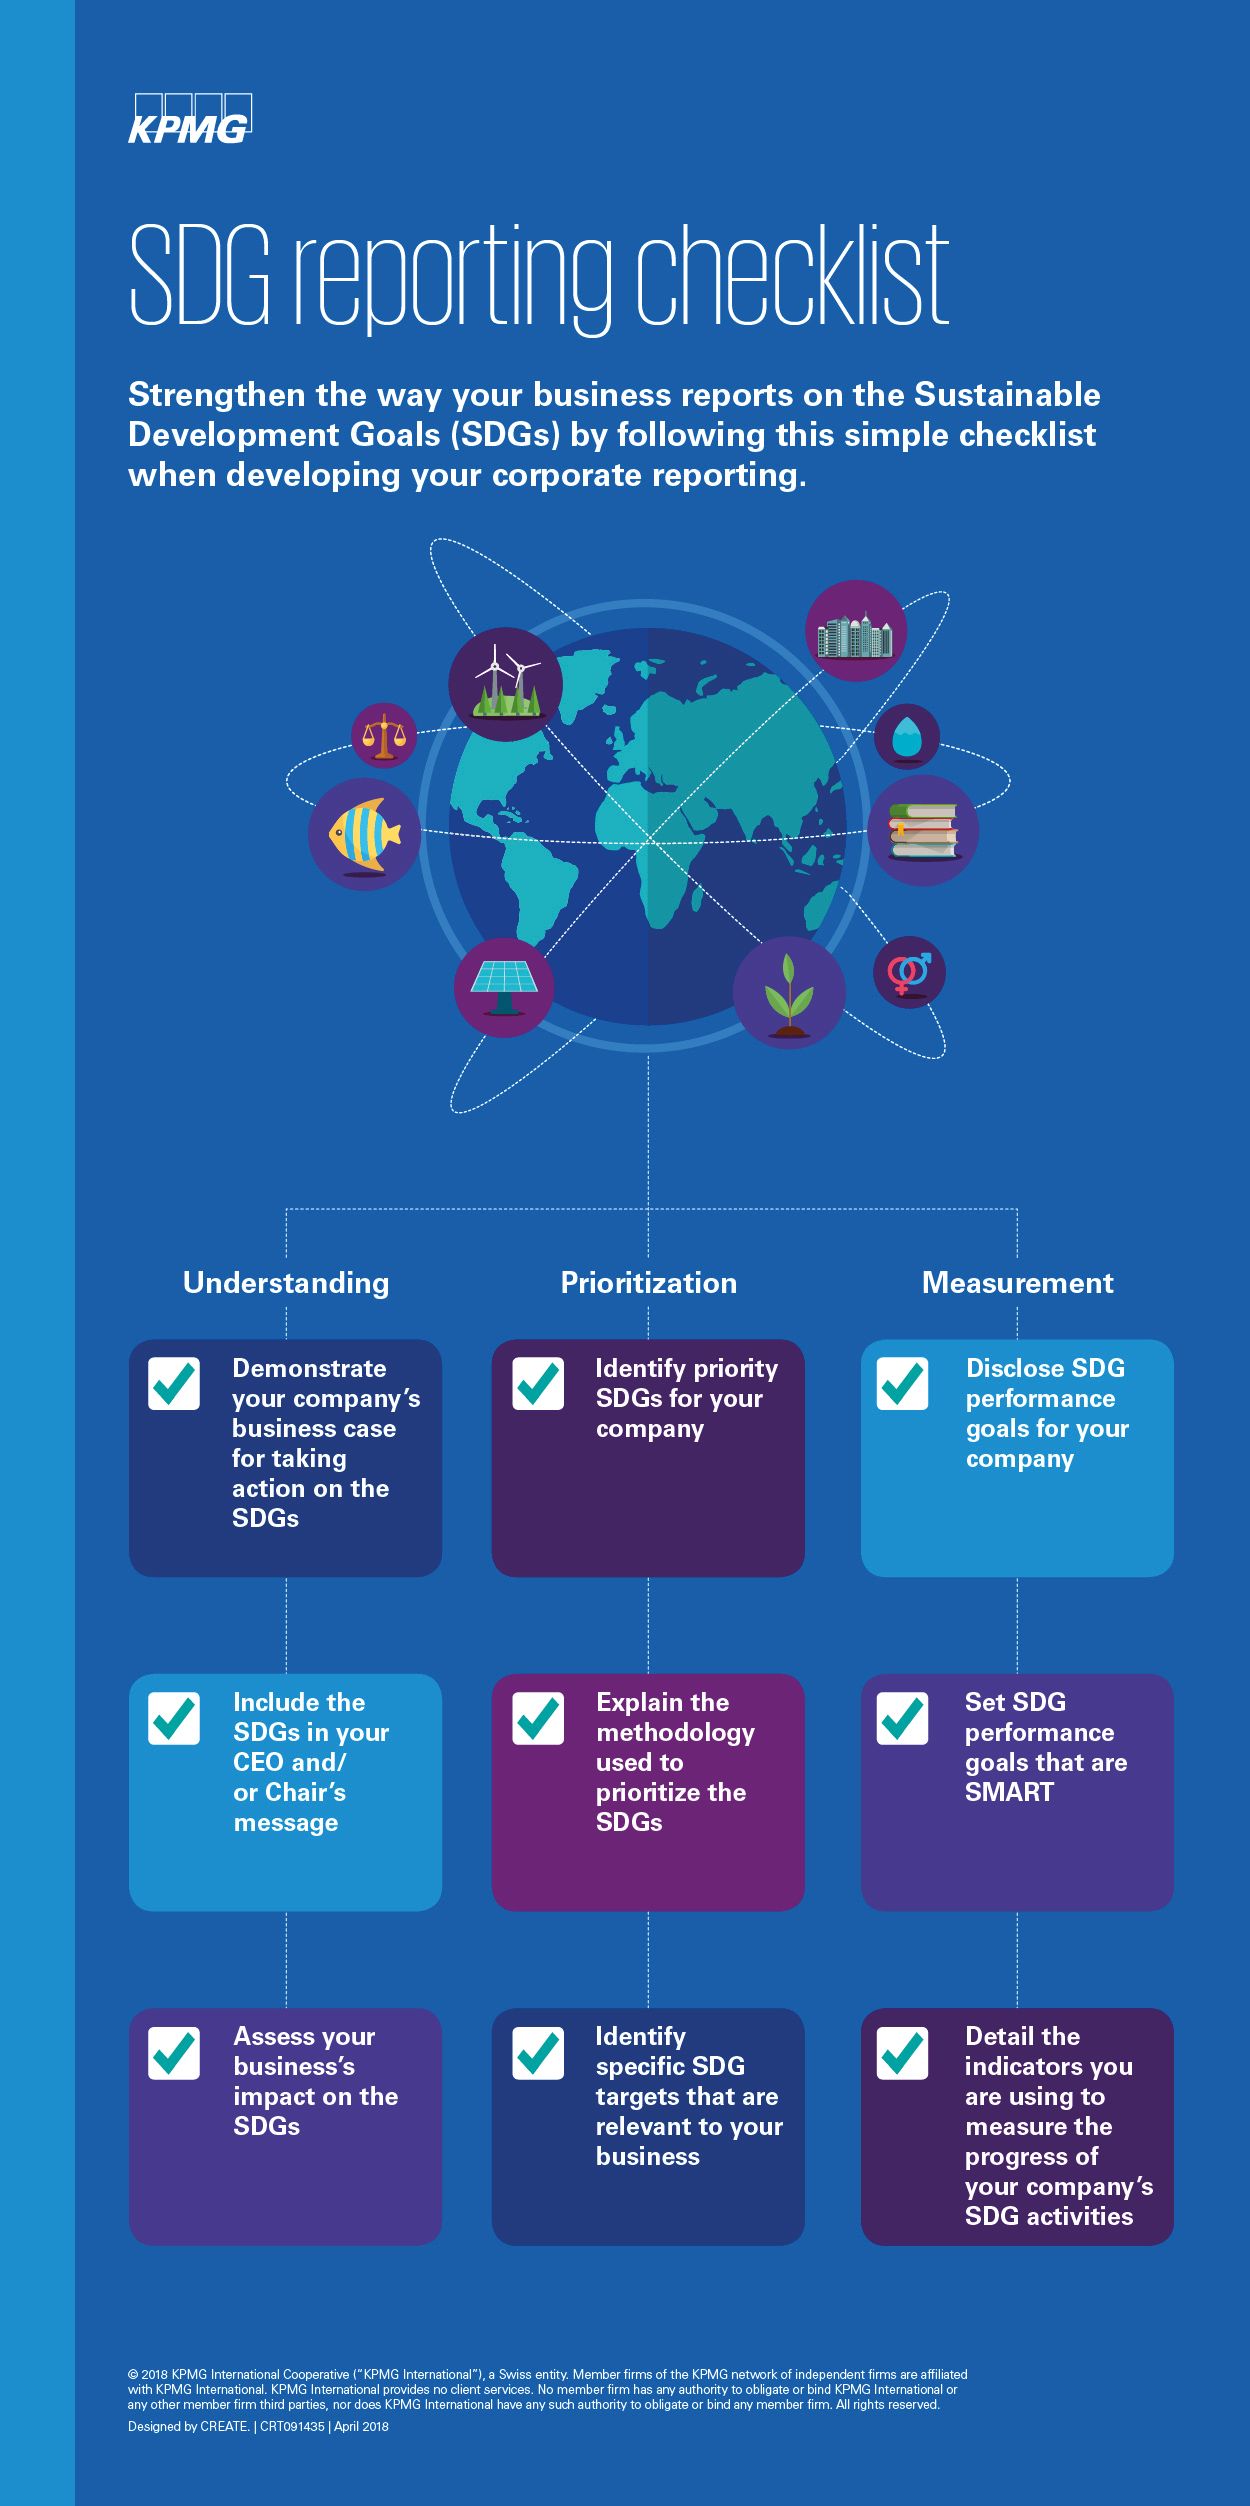 SDG reporting checklist Infographic